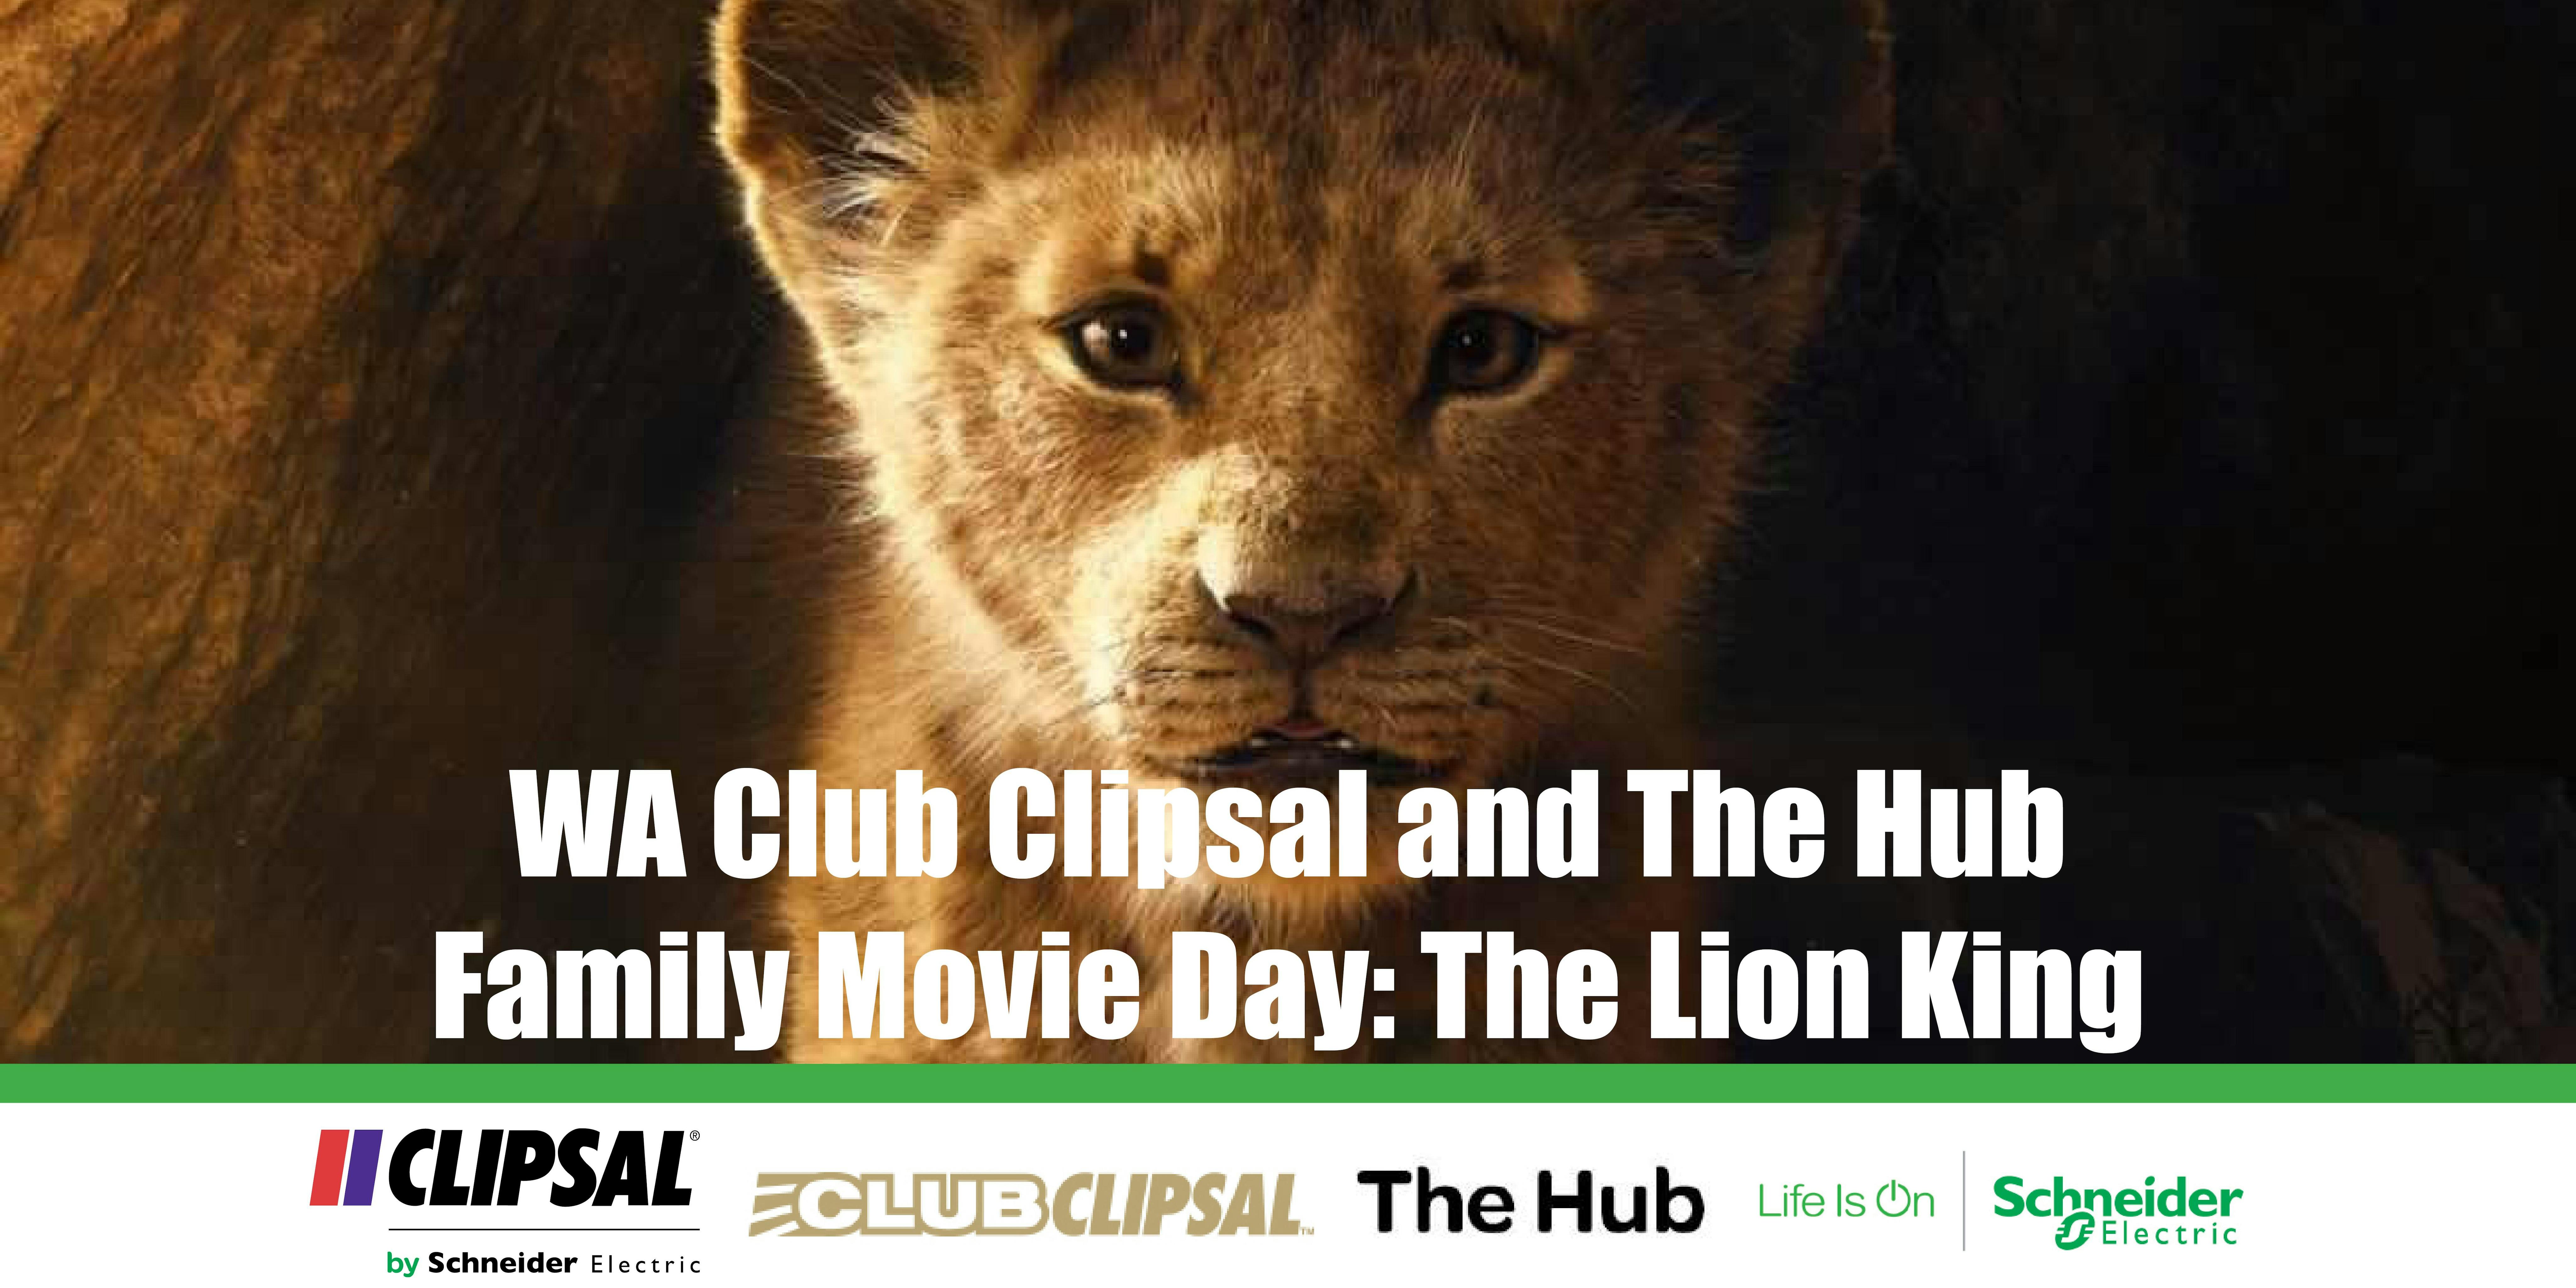 WA Club Clipsal and The Hub Family Movie Day: The Lion King